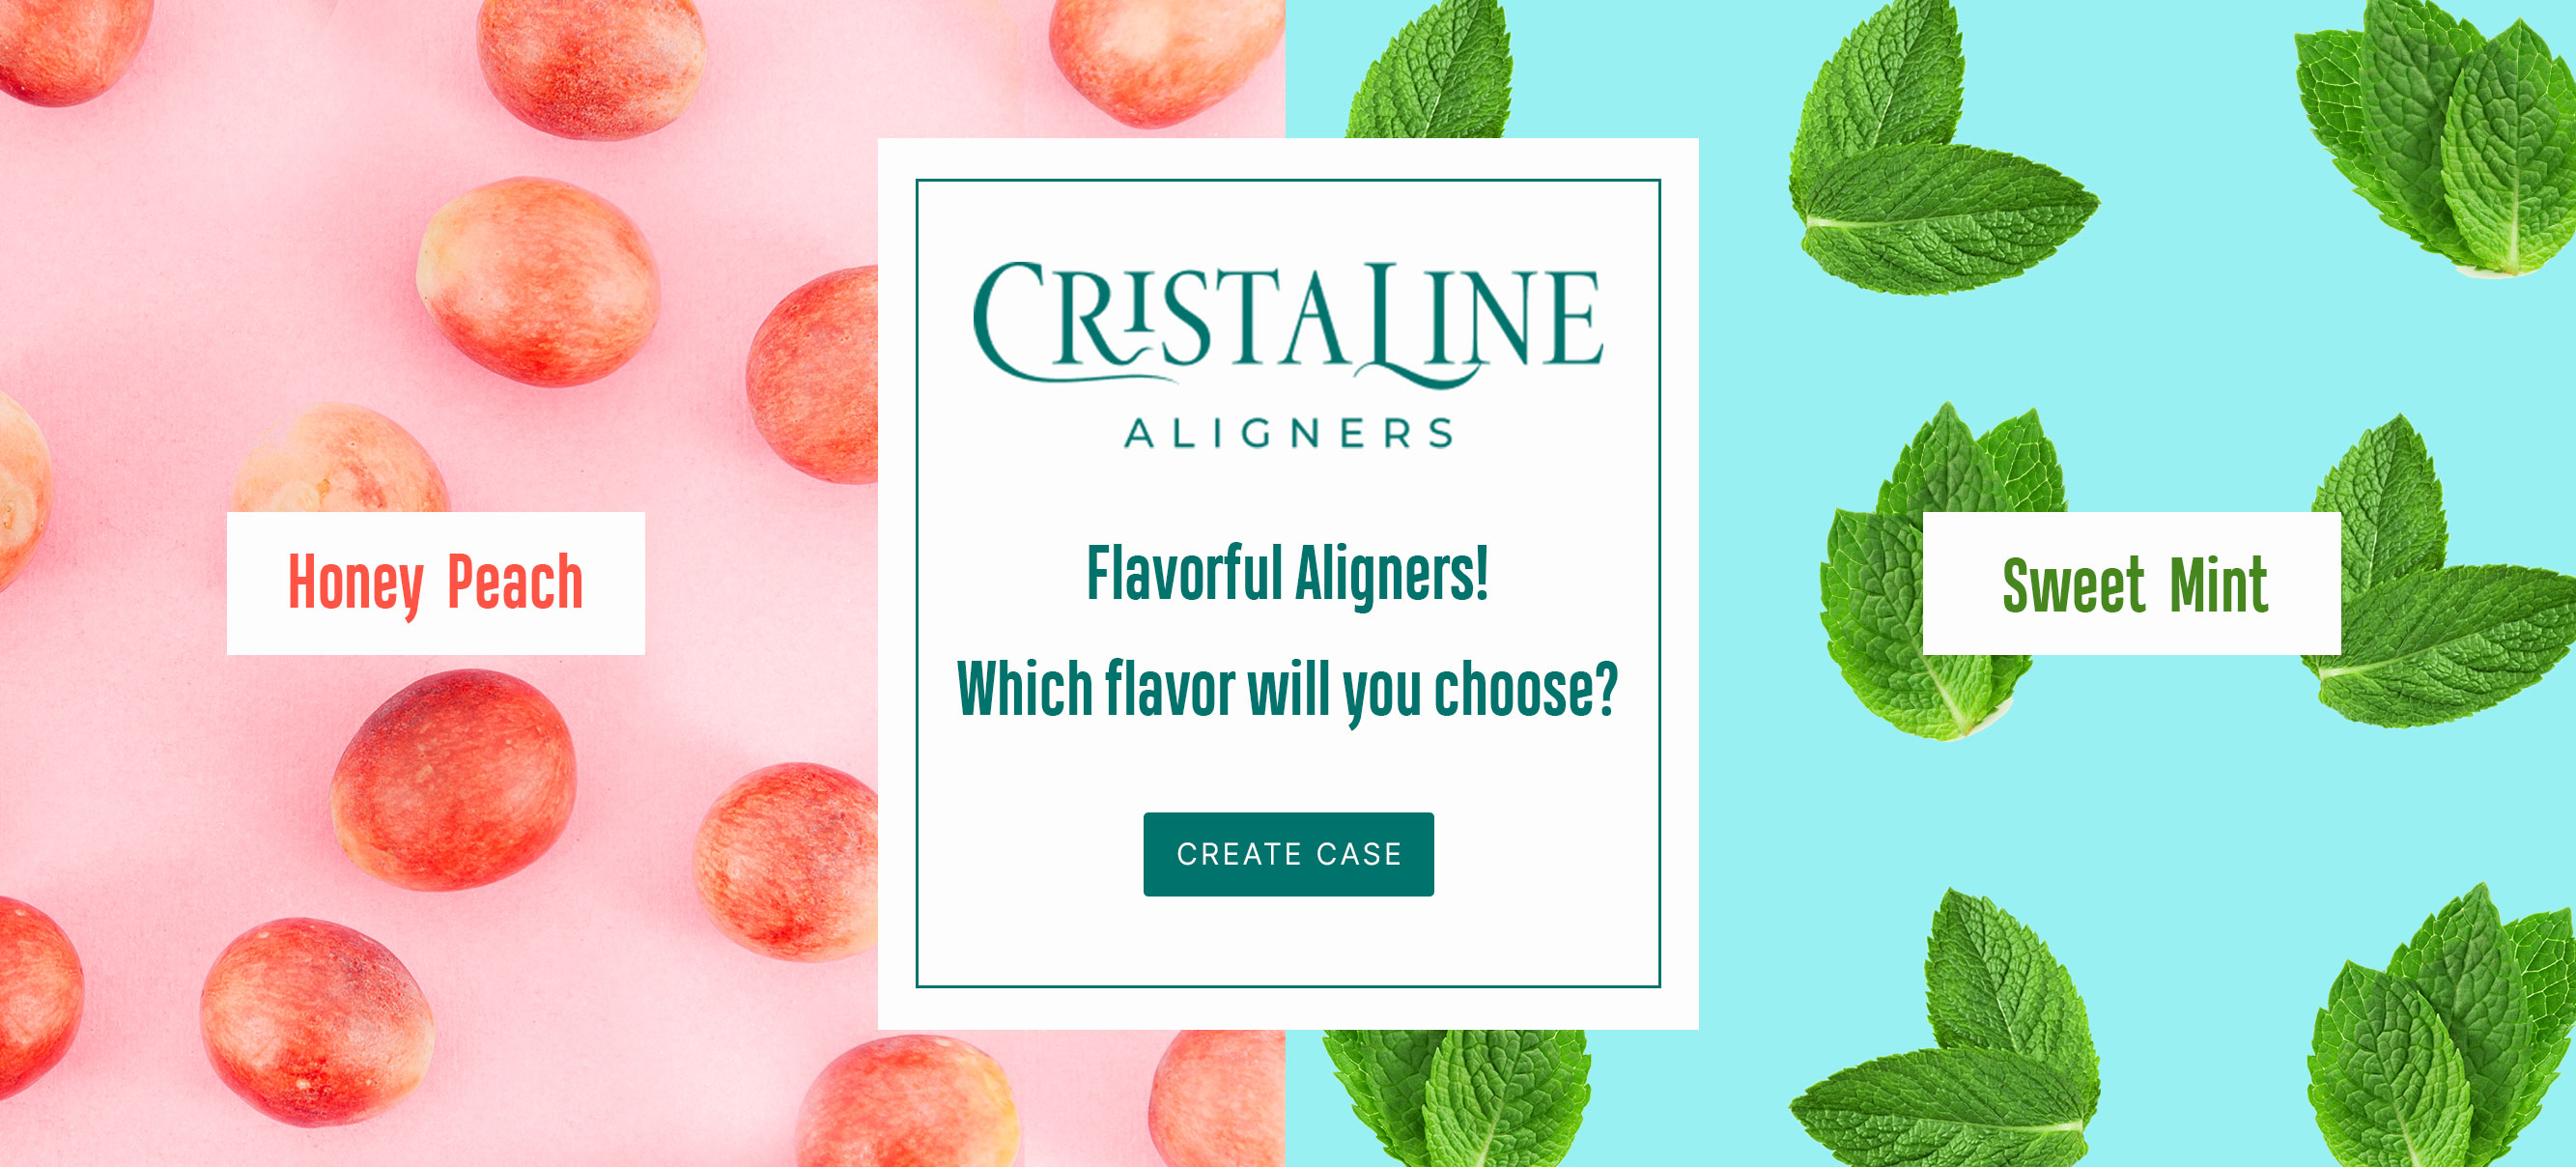 Flavorful Aligners!